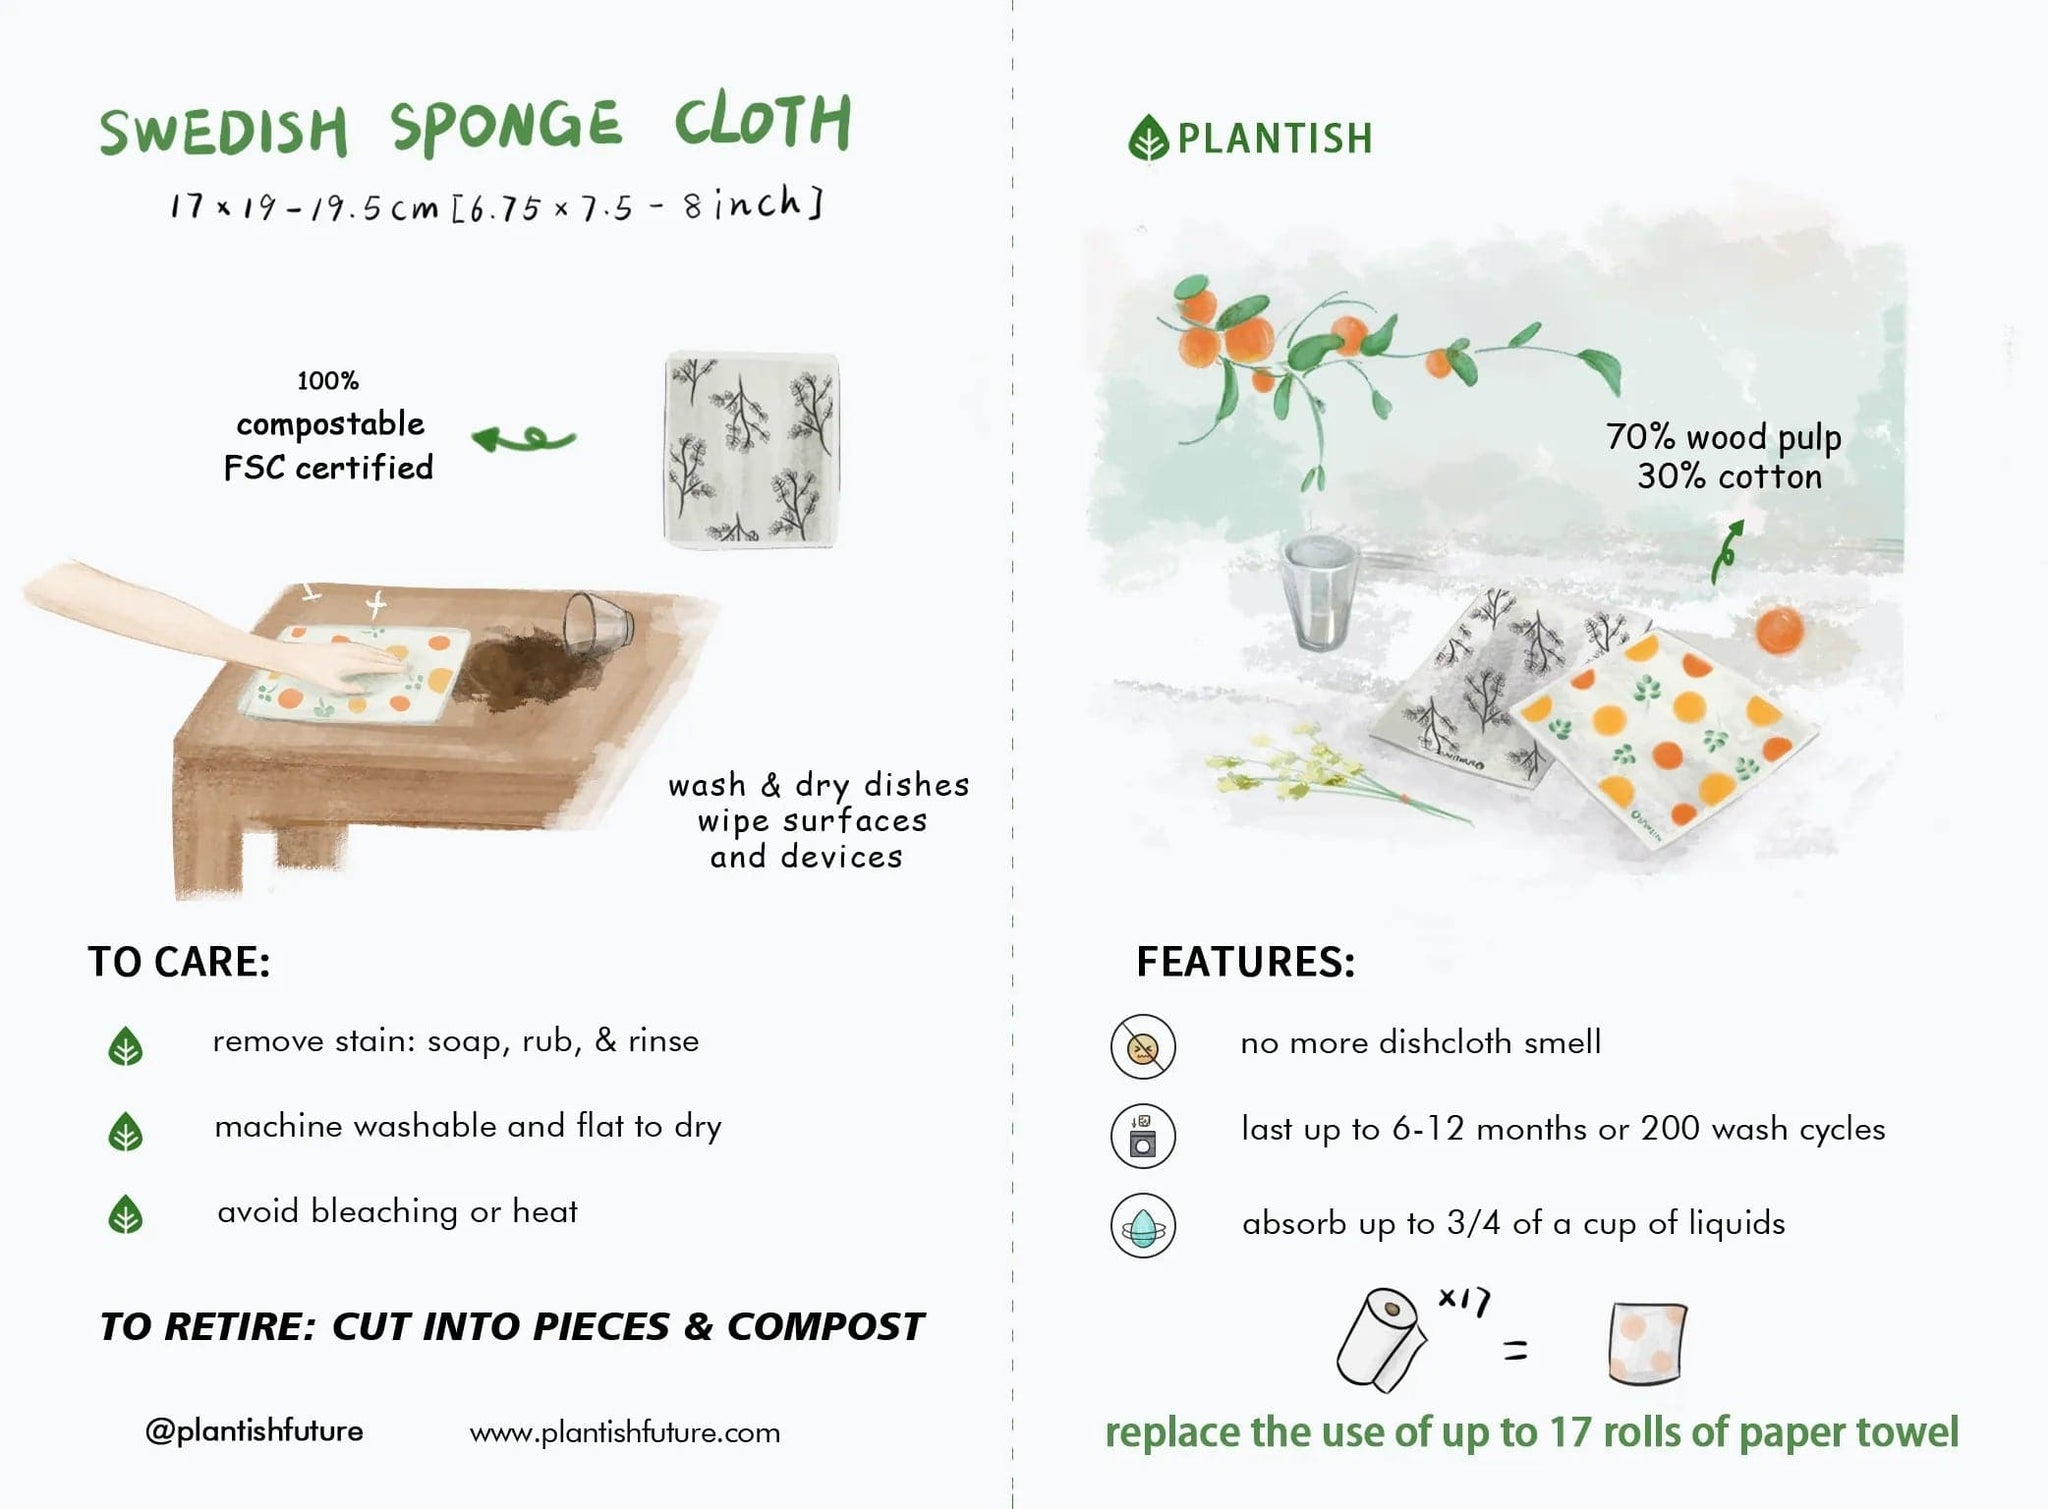 Reusable Swedish dishcloth infographic including care tips. Made with wood pulp and cotton making it plastic free and 100% compostable!